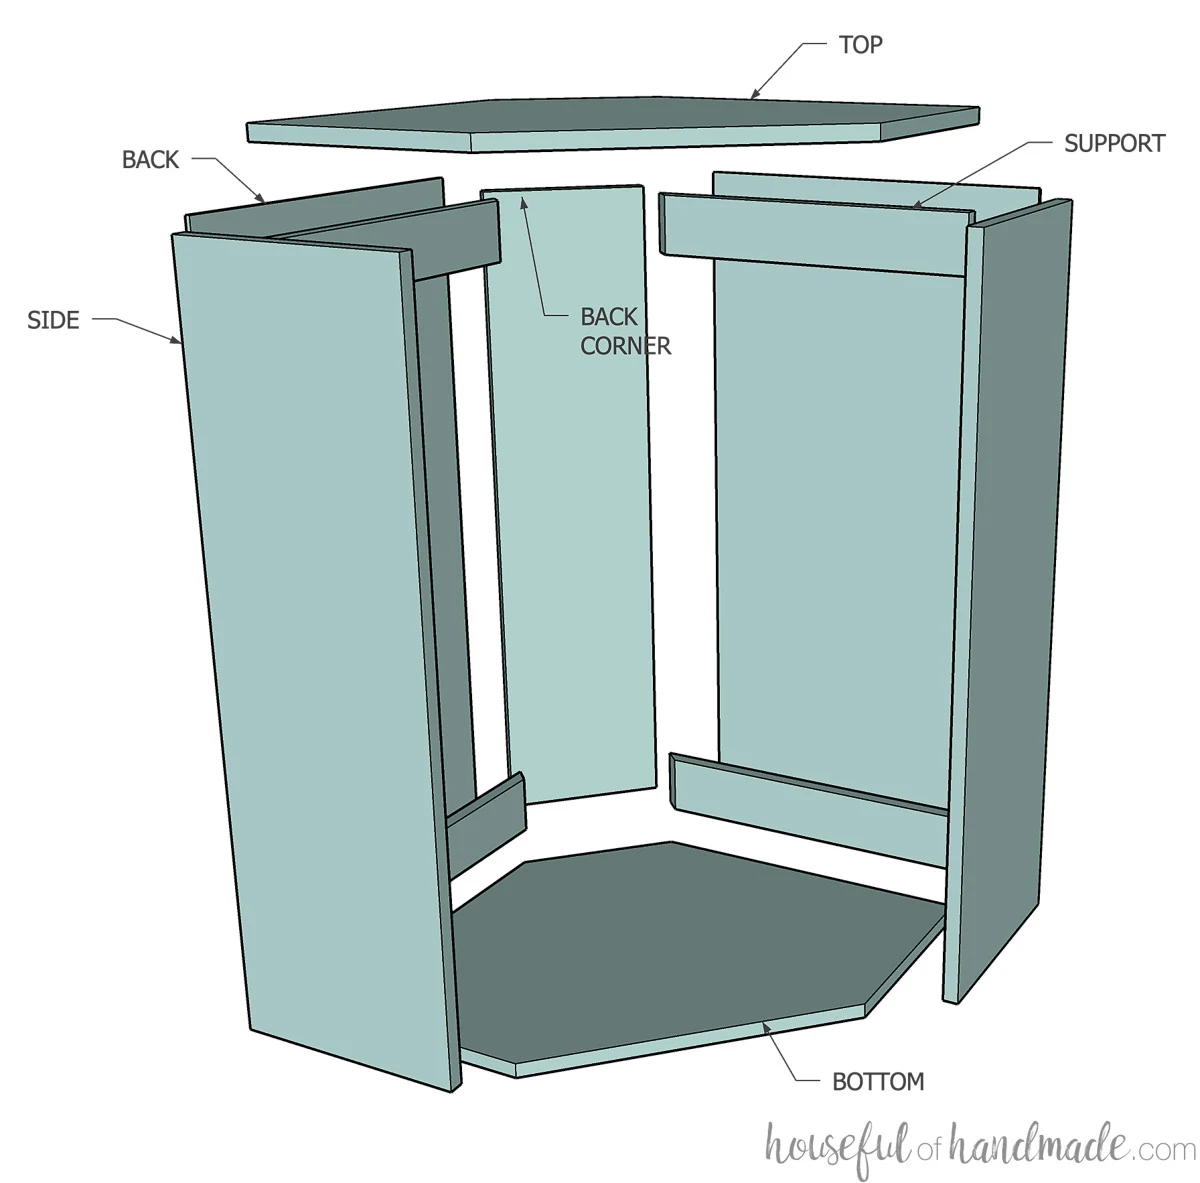 3D sketch of a diagonal corner cabinet with all the parts labeled.